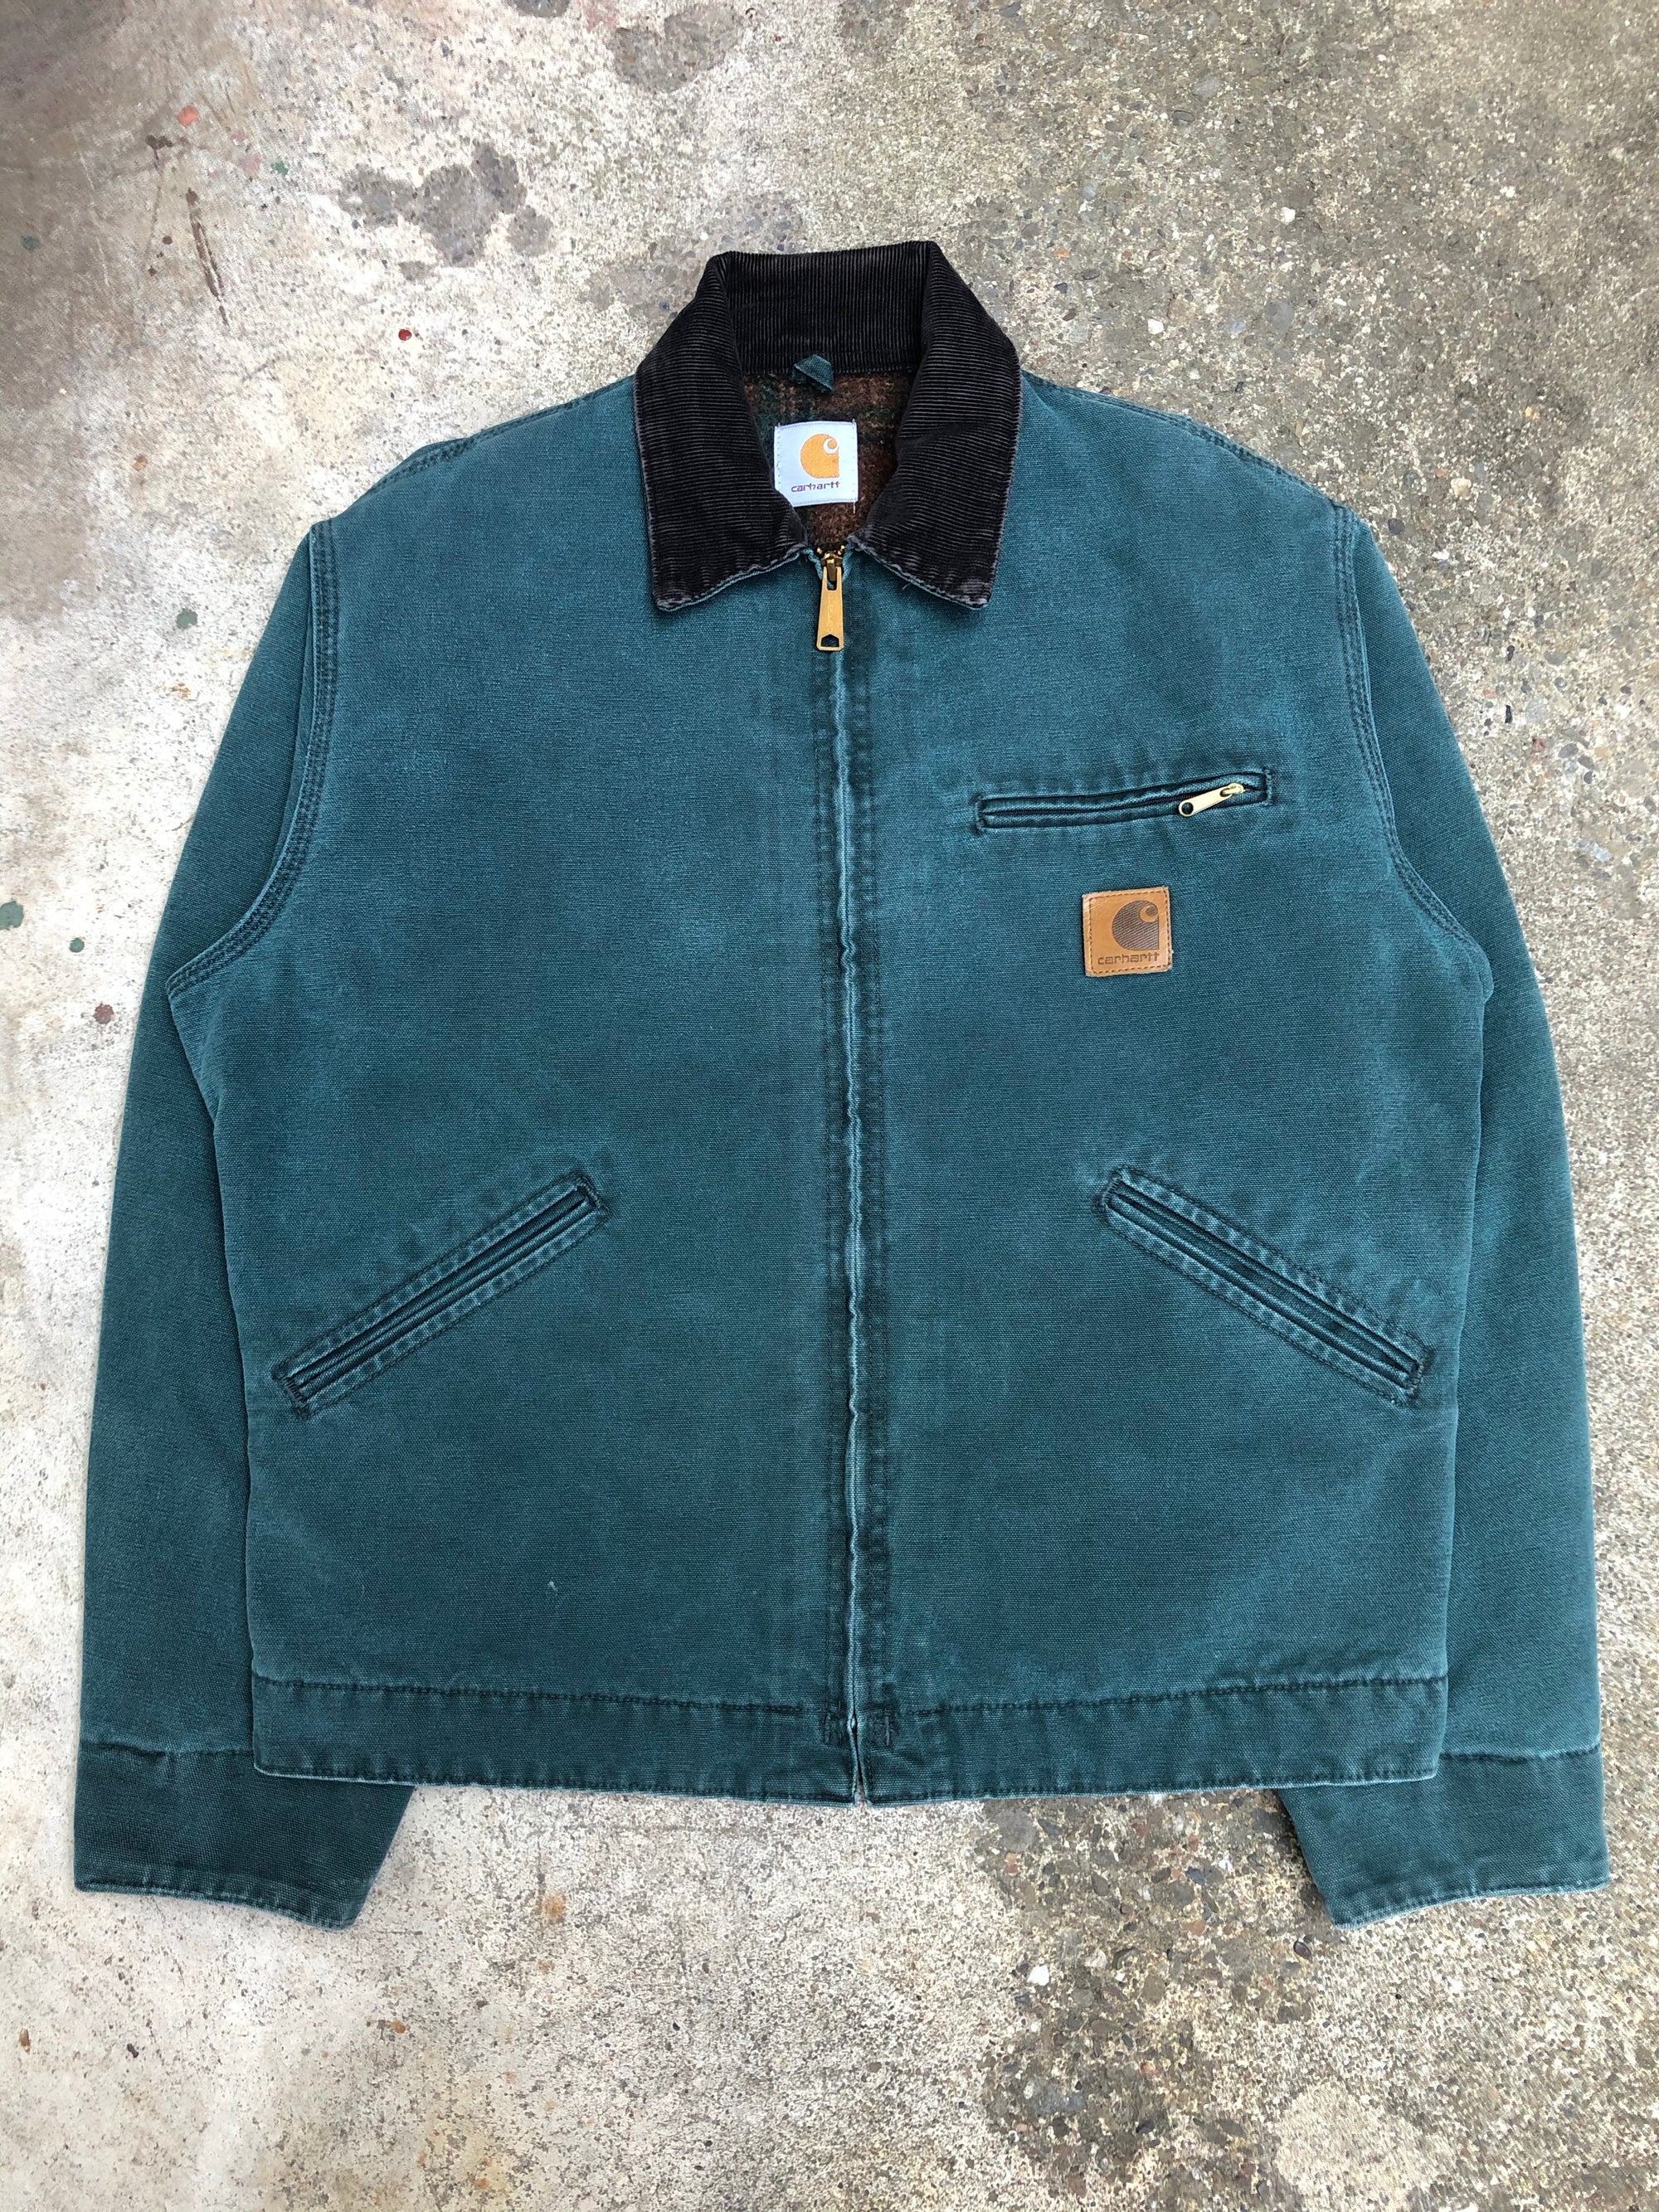 1990s Carhartt Teal Lined Work Jacket